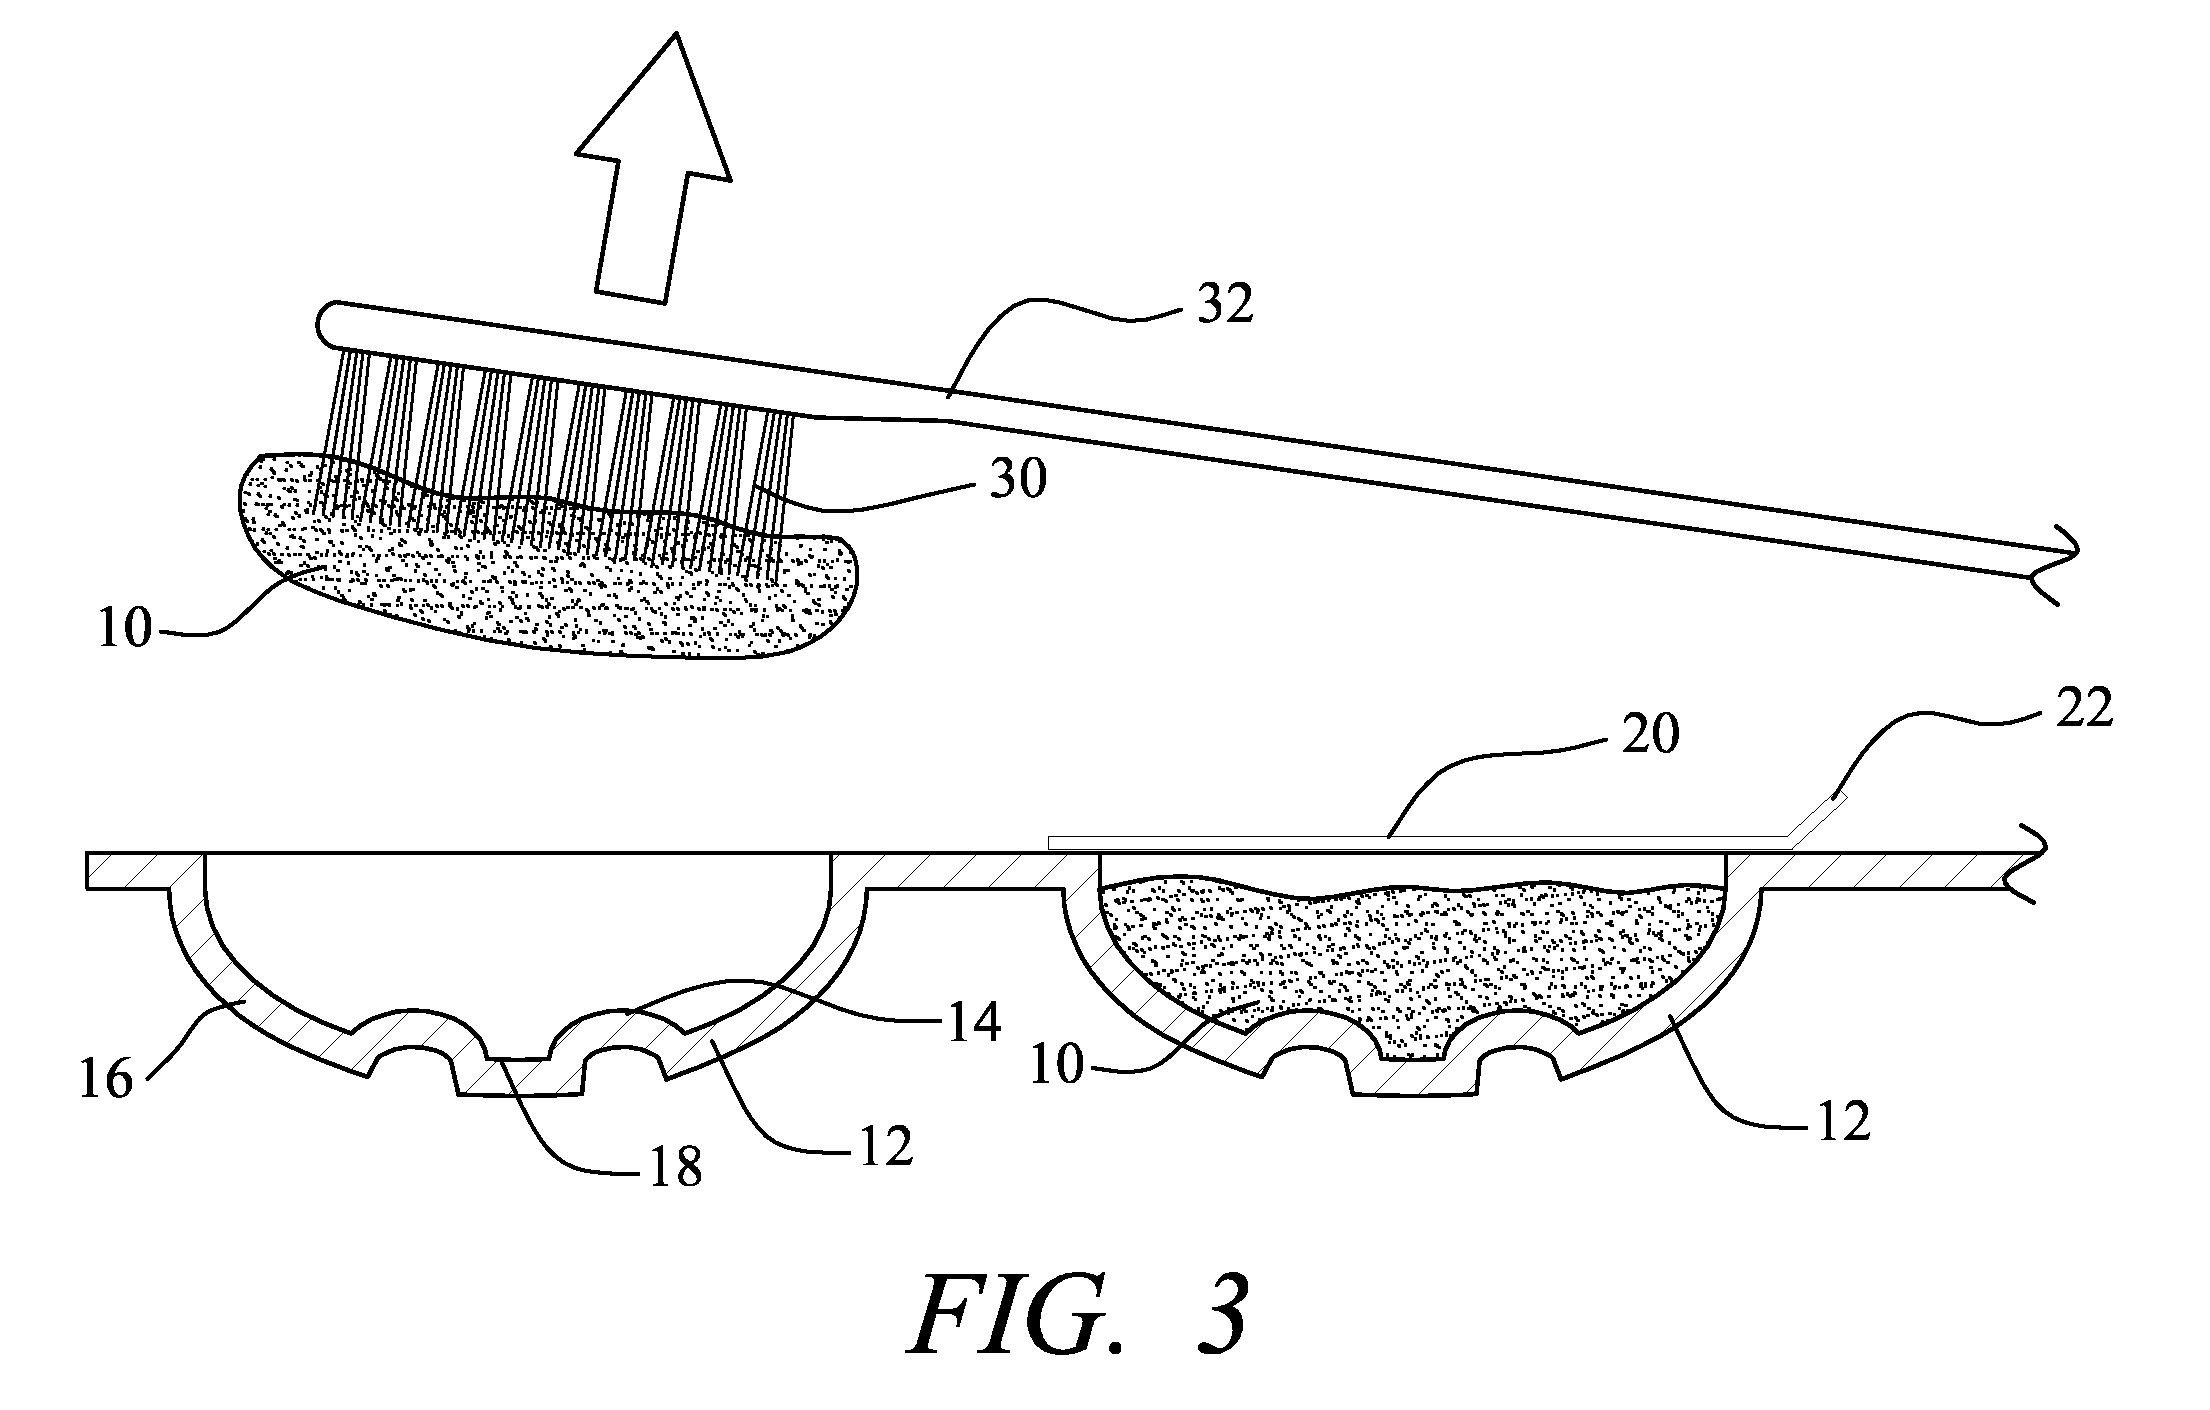 Toothpaste composition and method of applying a single serving of toothpaste to a toothbrush